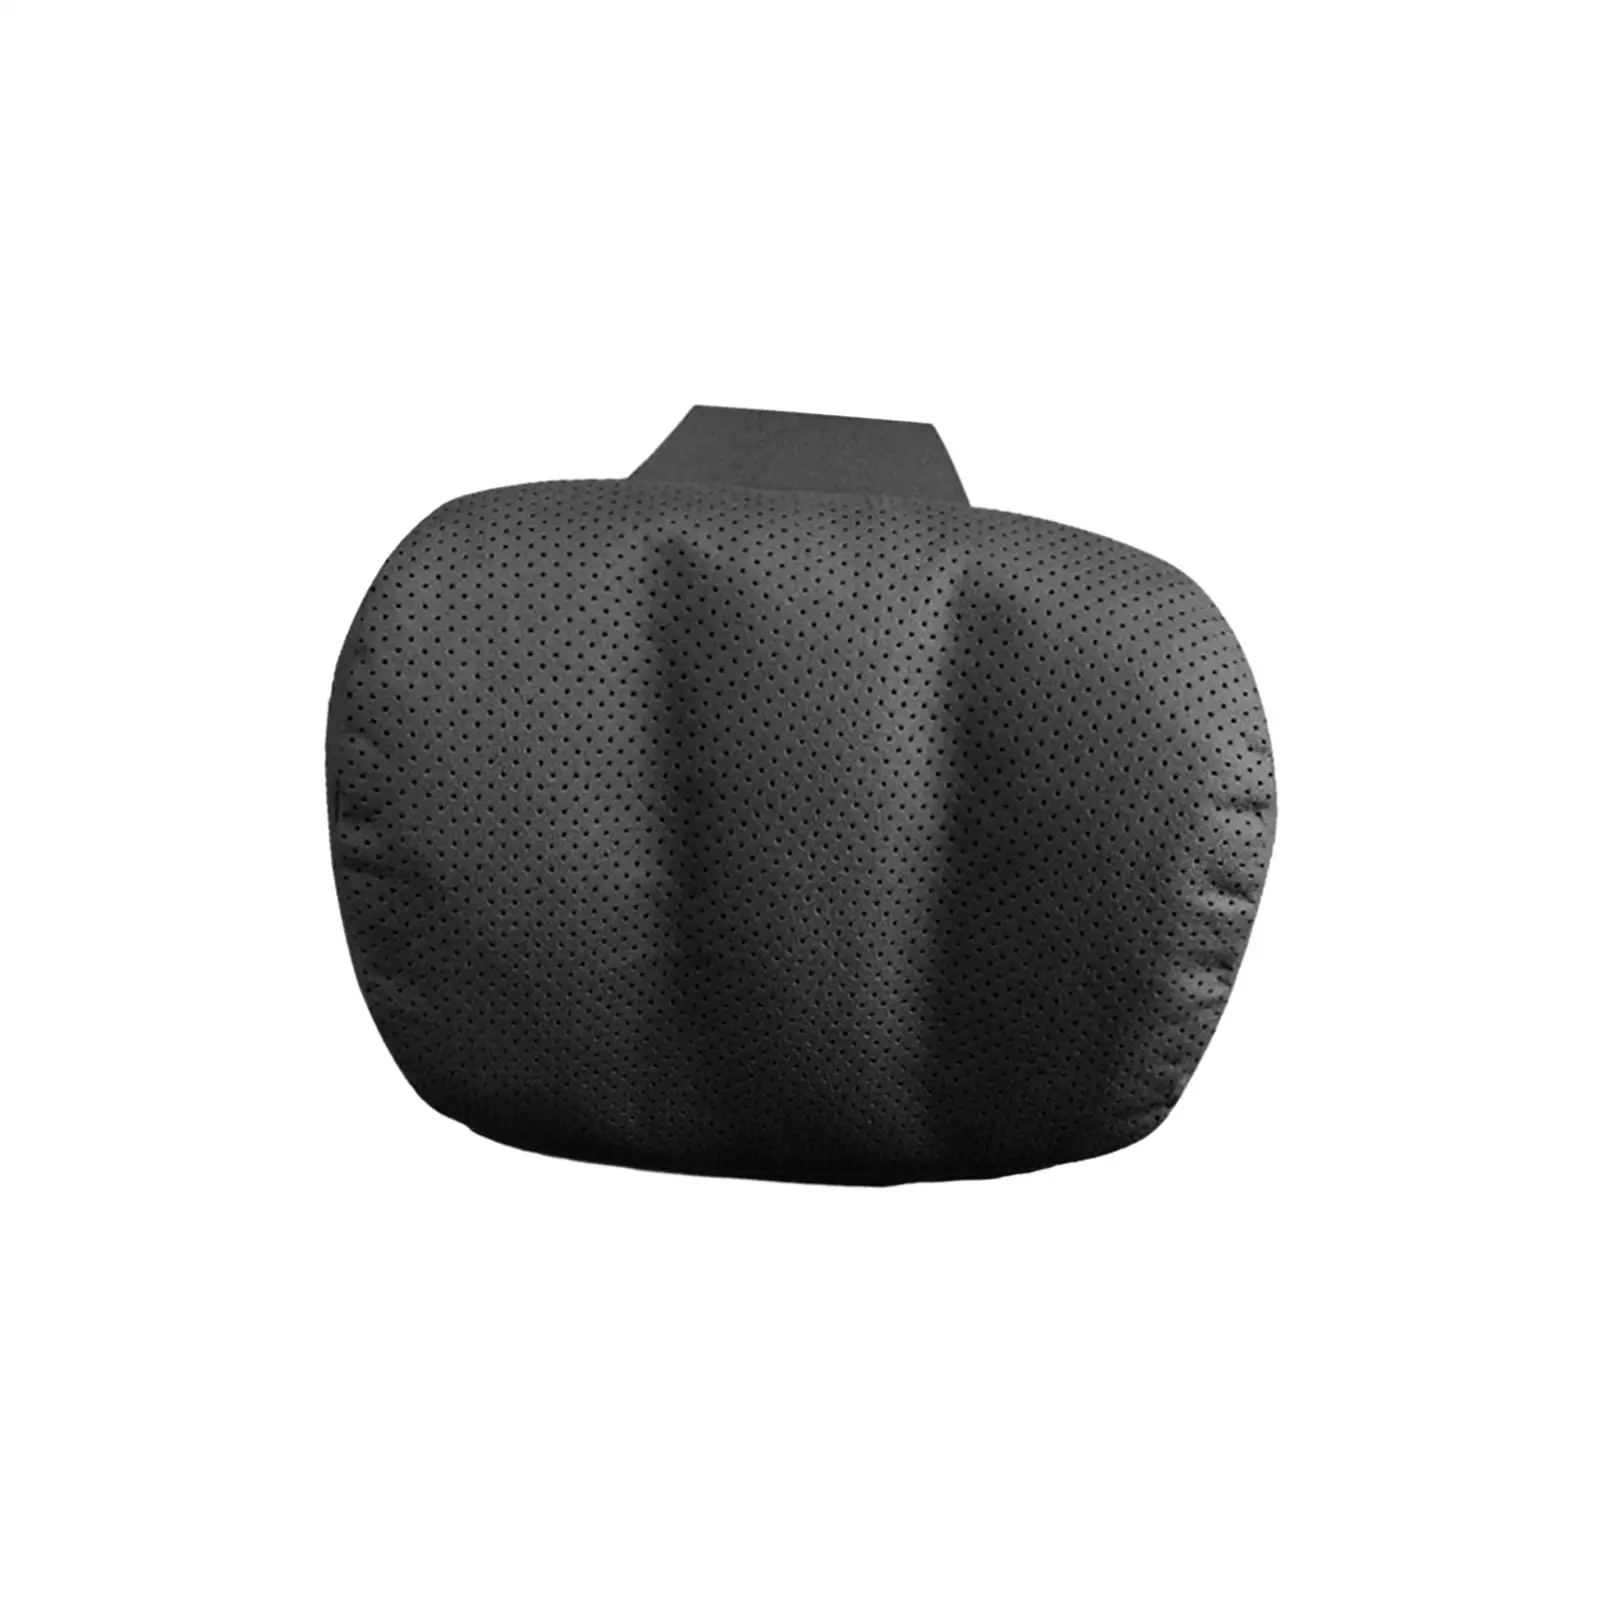 Head Rest Pillows Breathable Portable Comfortable Universal Car Headrest Pillow for Travel Driving Seat Home Office